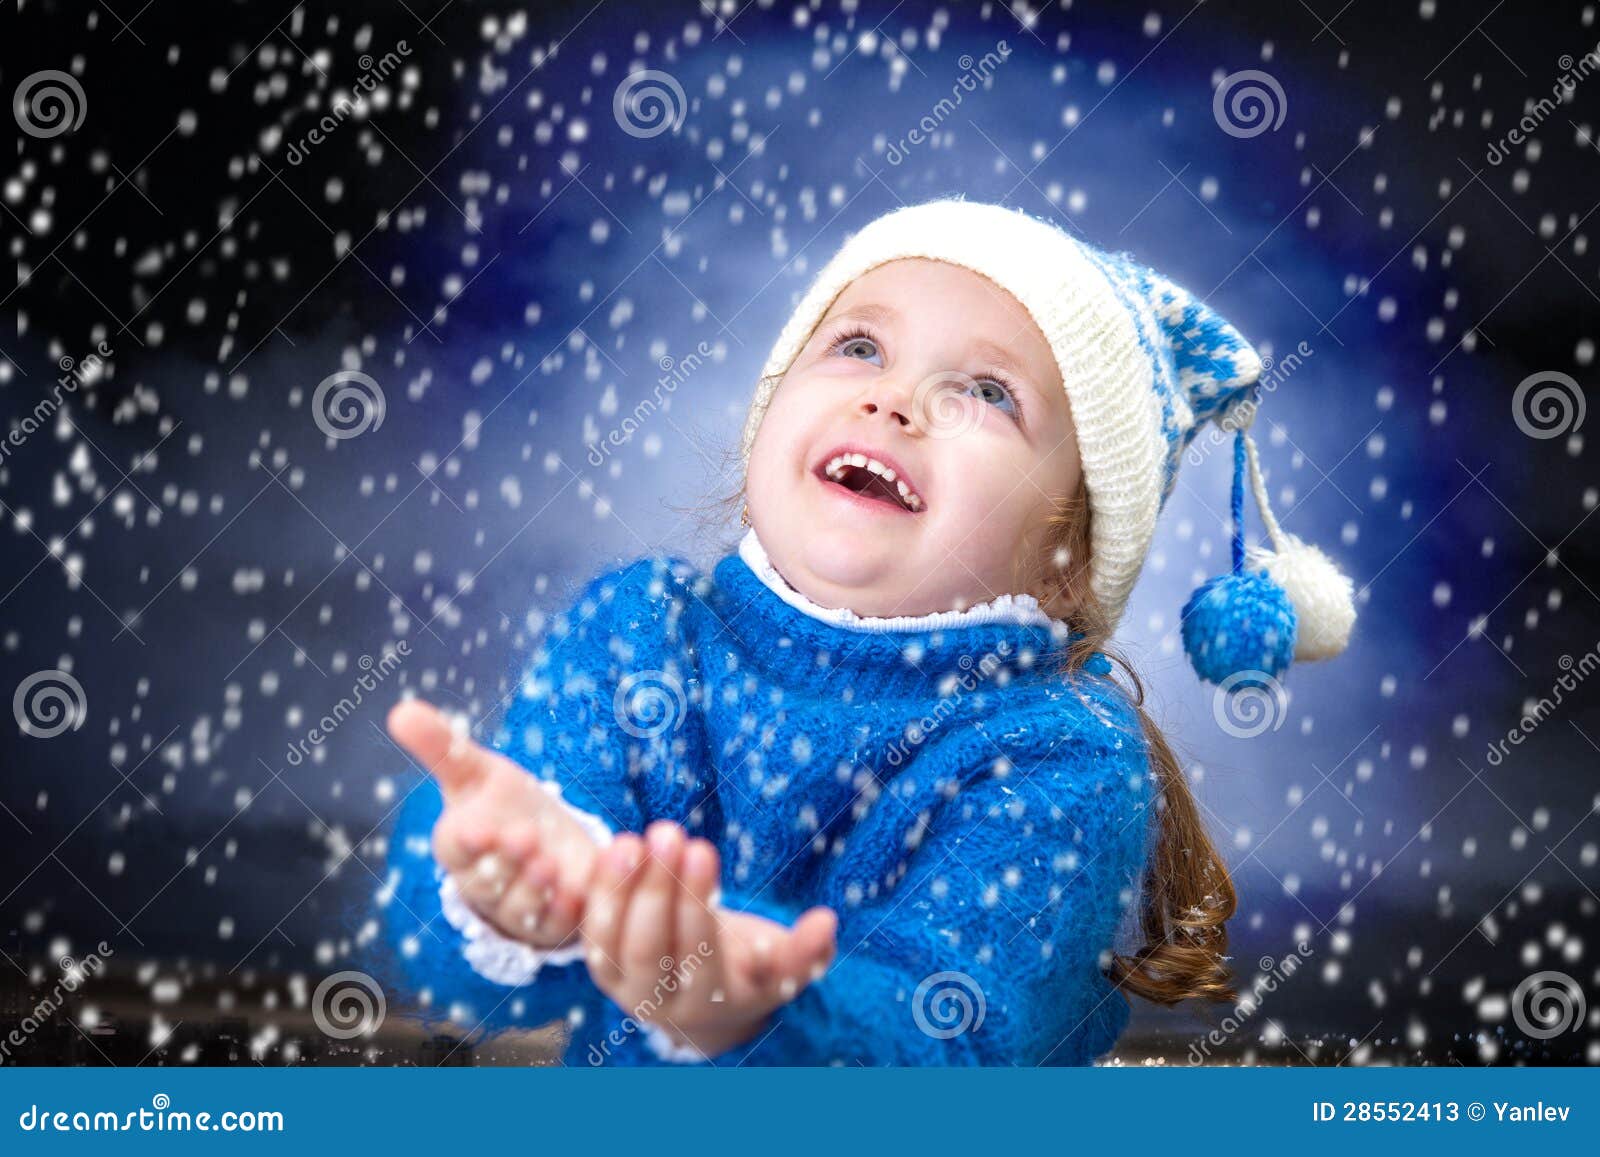 Little winter girl stock image. Image of cold, beauty - 28552413